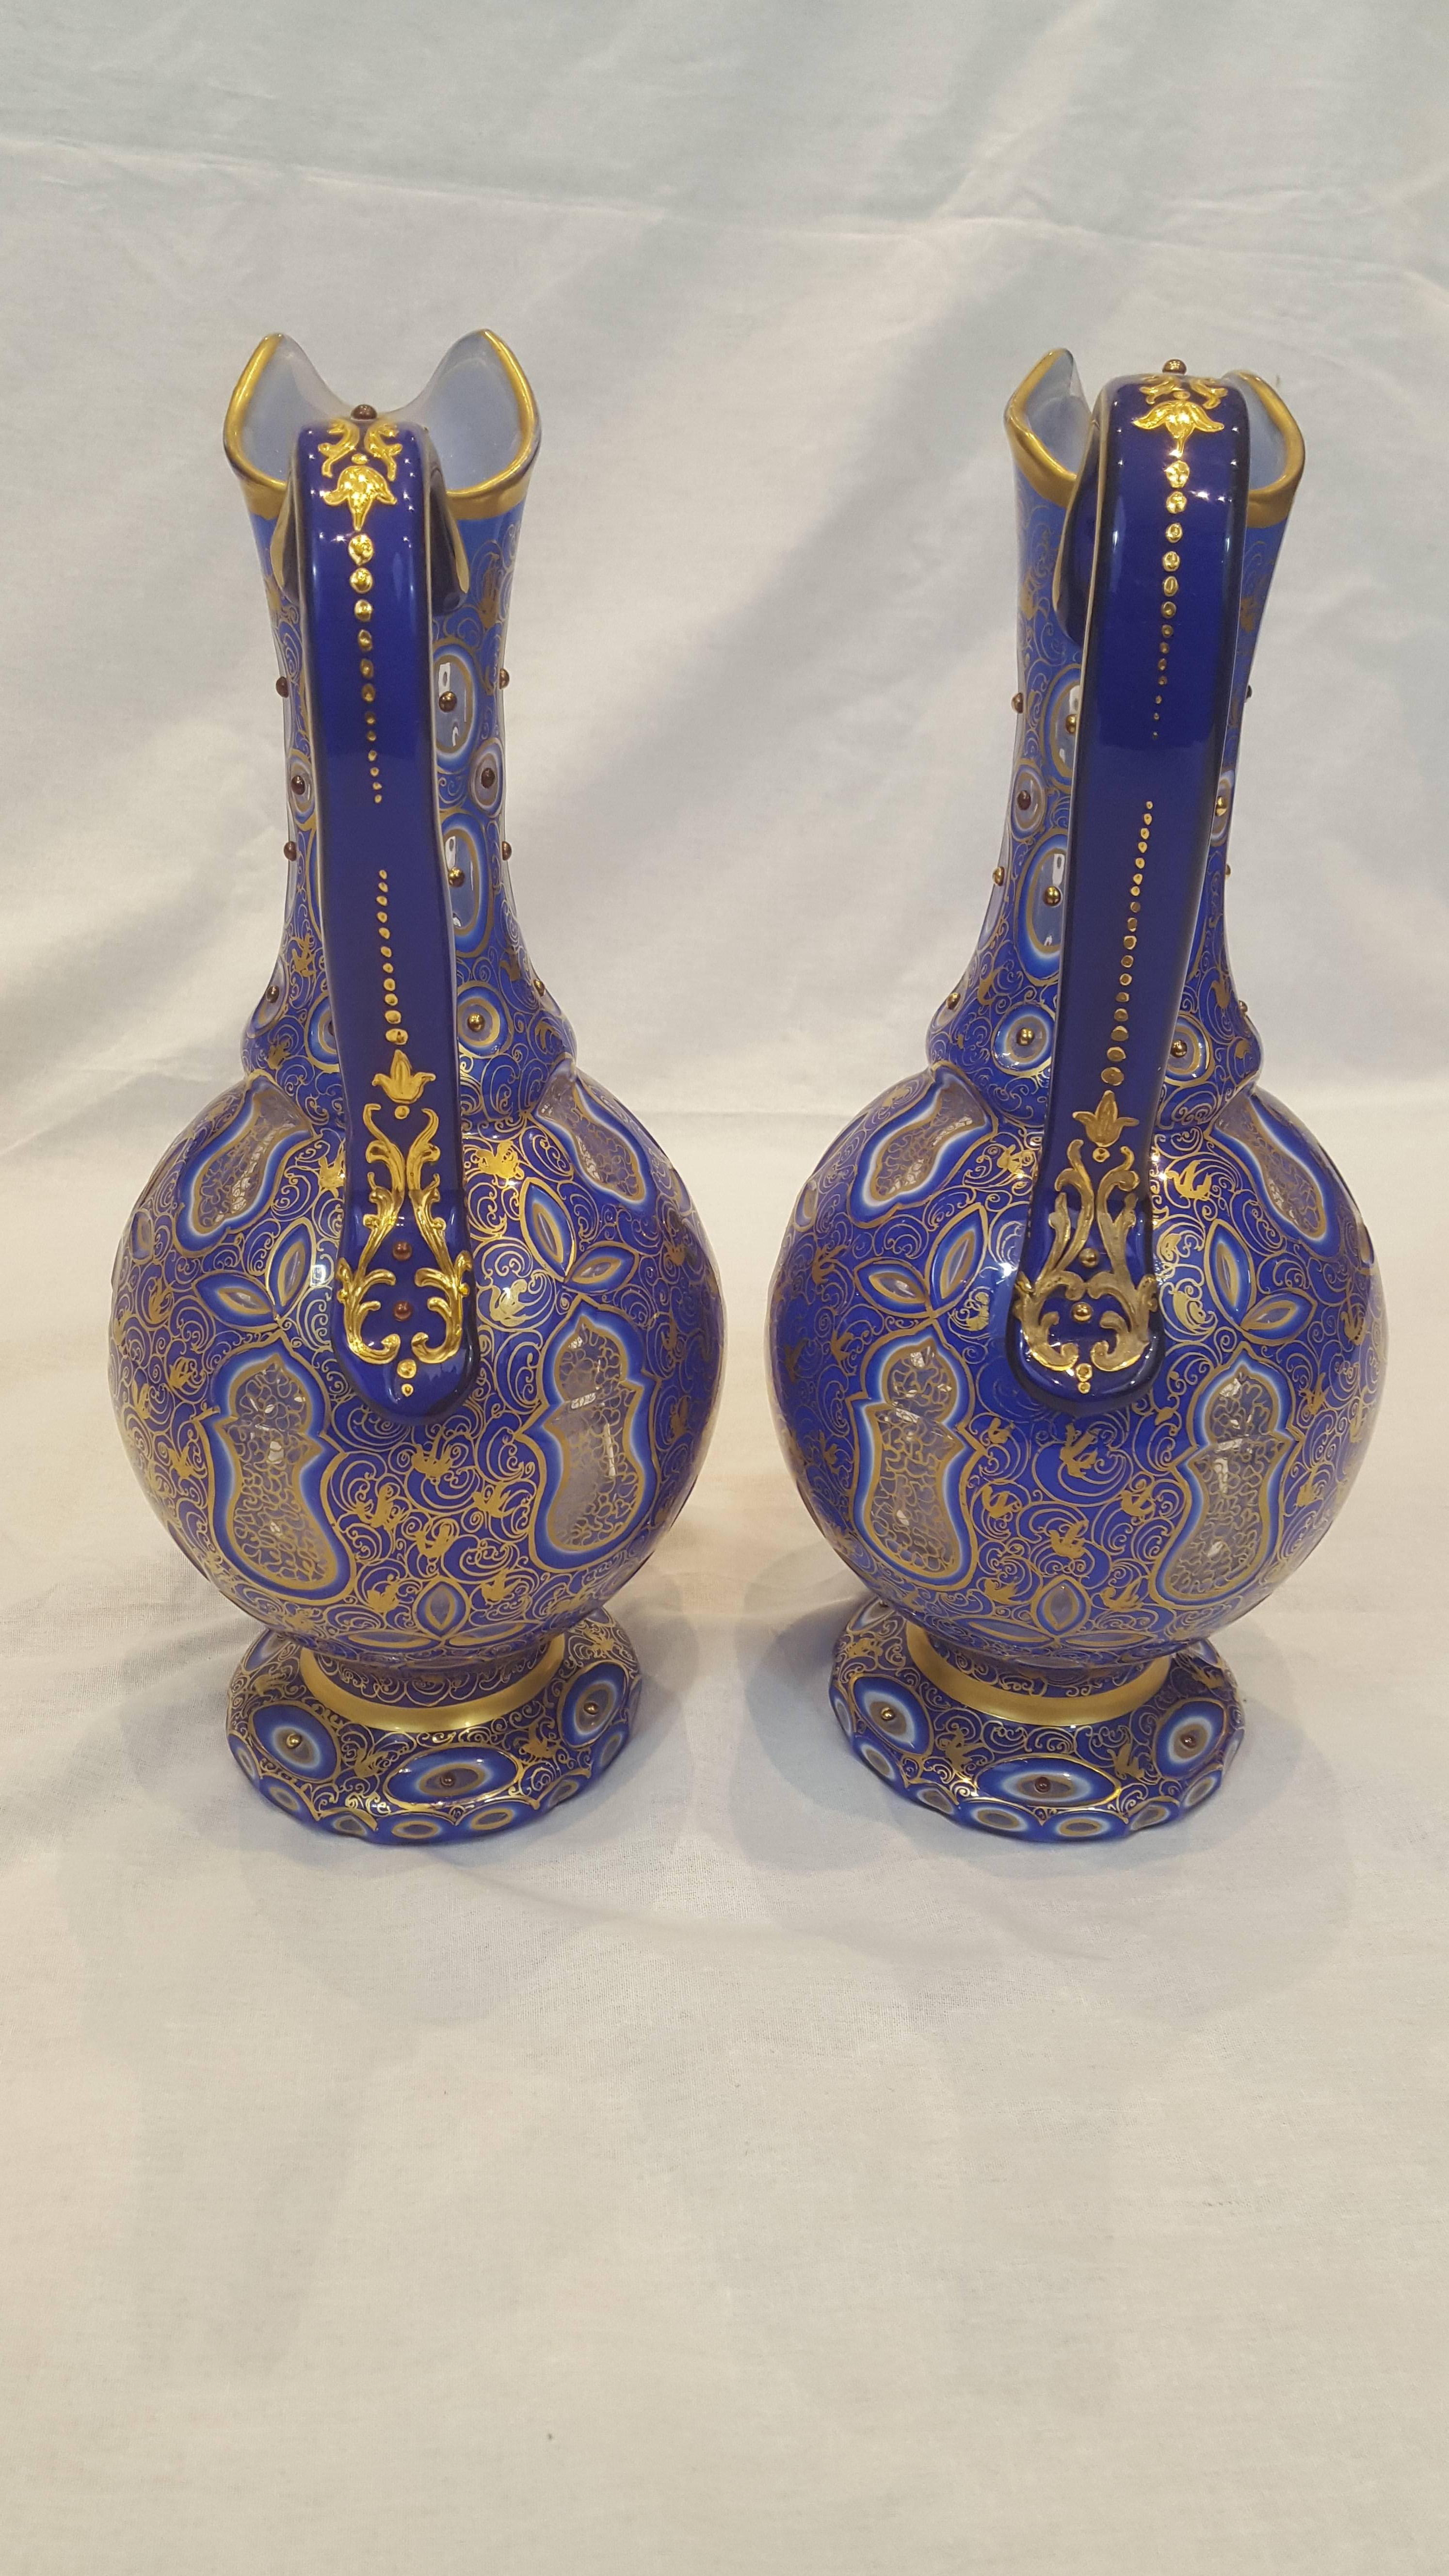 Made of a round bulbous body in blue glass with white overlay sitting upon a socle base, they feature a single handle. Each of the ewers are enamelled and gilt in a swirling decorative gilt motif with applied 'jewels'.
Made for the Persian market.